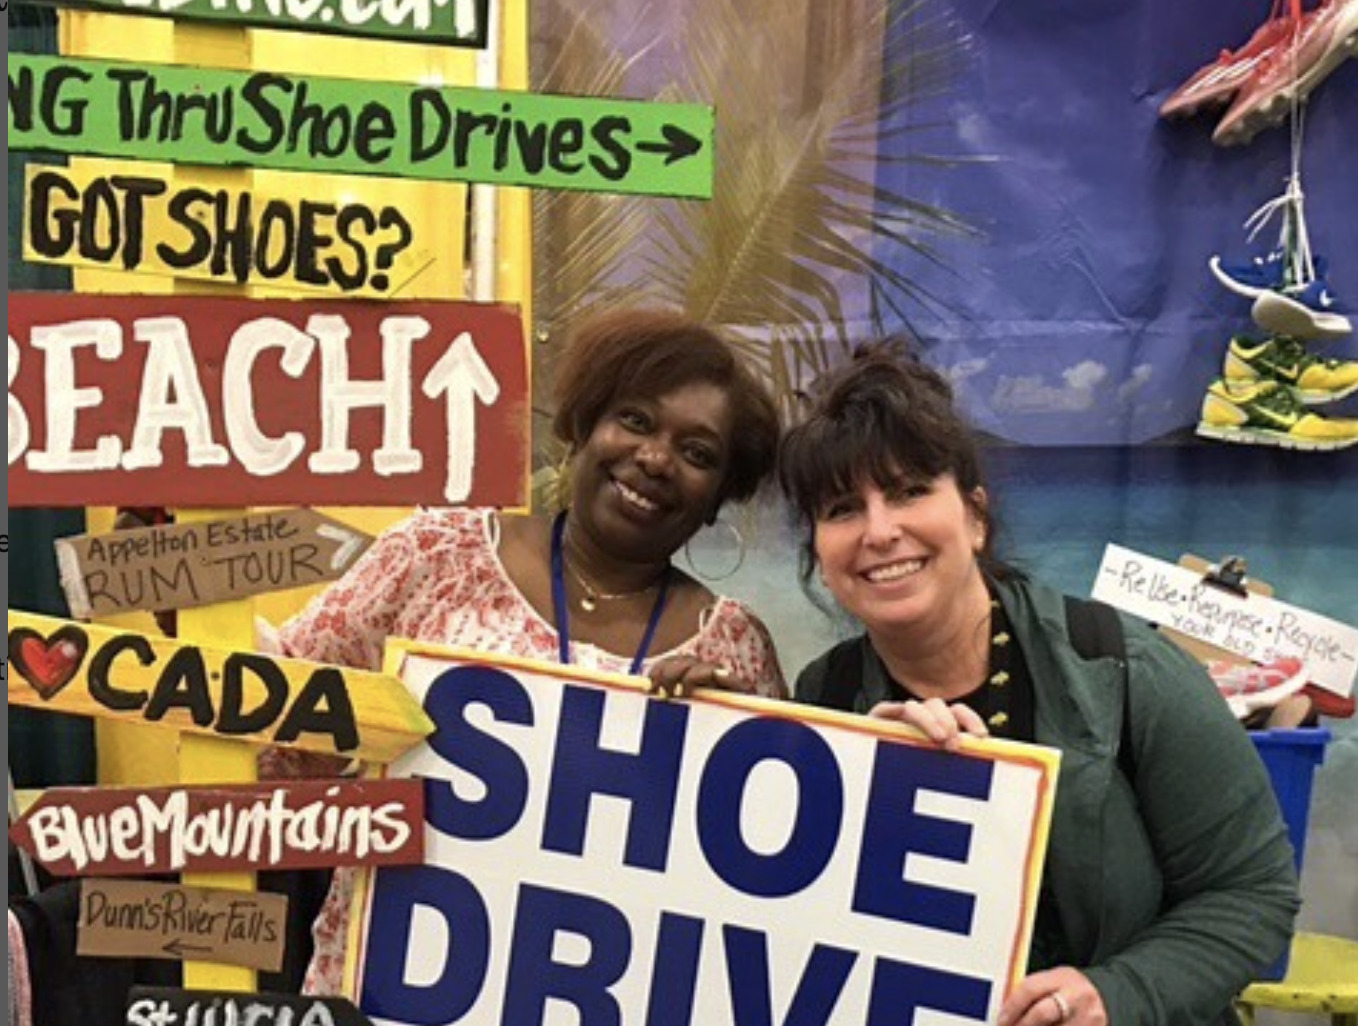 Shoe drive fundraising is a free fundraiser